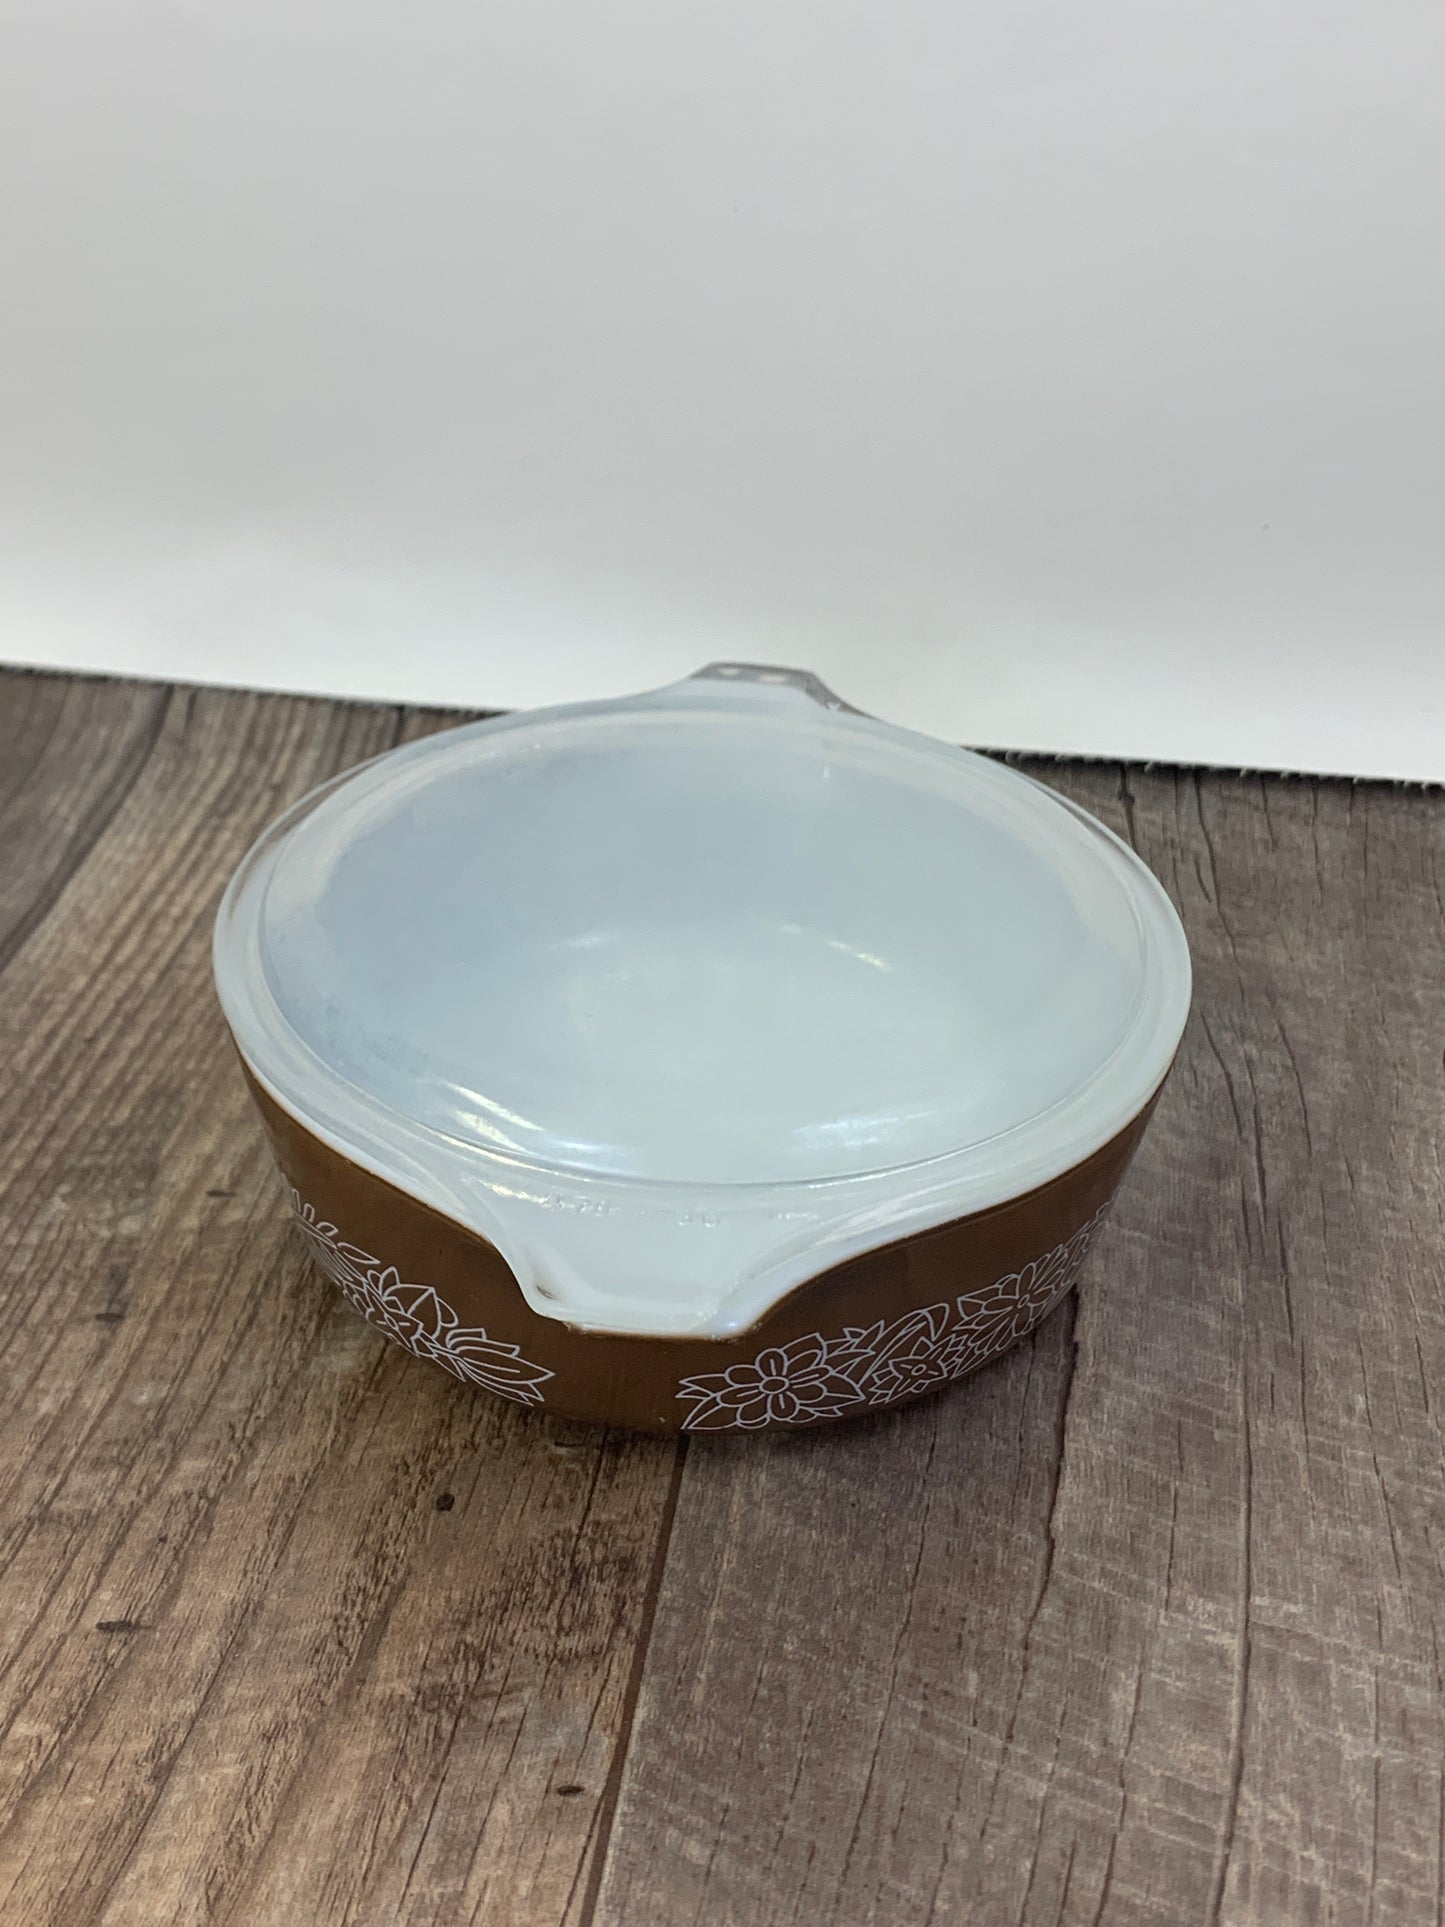 Pyrex Woodland Small Casserole Dish, Vintage Pyrex 471, Vintage Oven to Table Serving Dish, Vintage Woodland Pyrex Cookware, Made in the USA